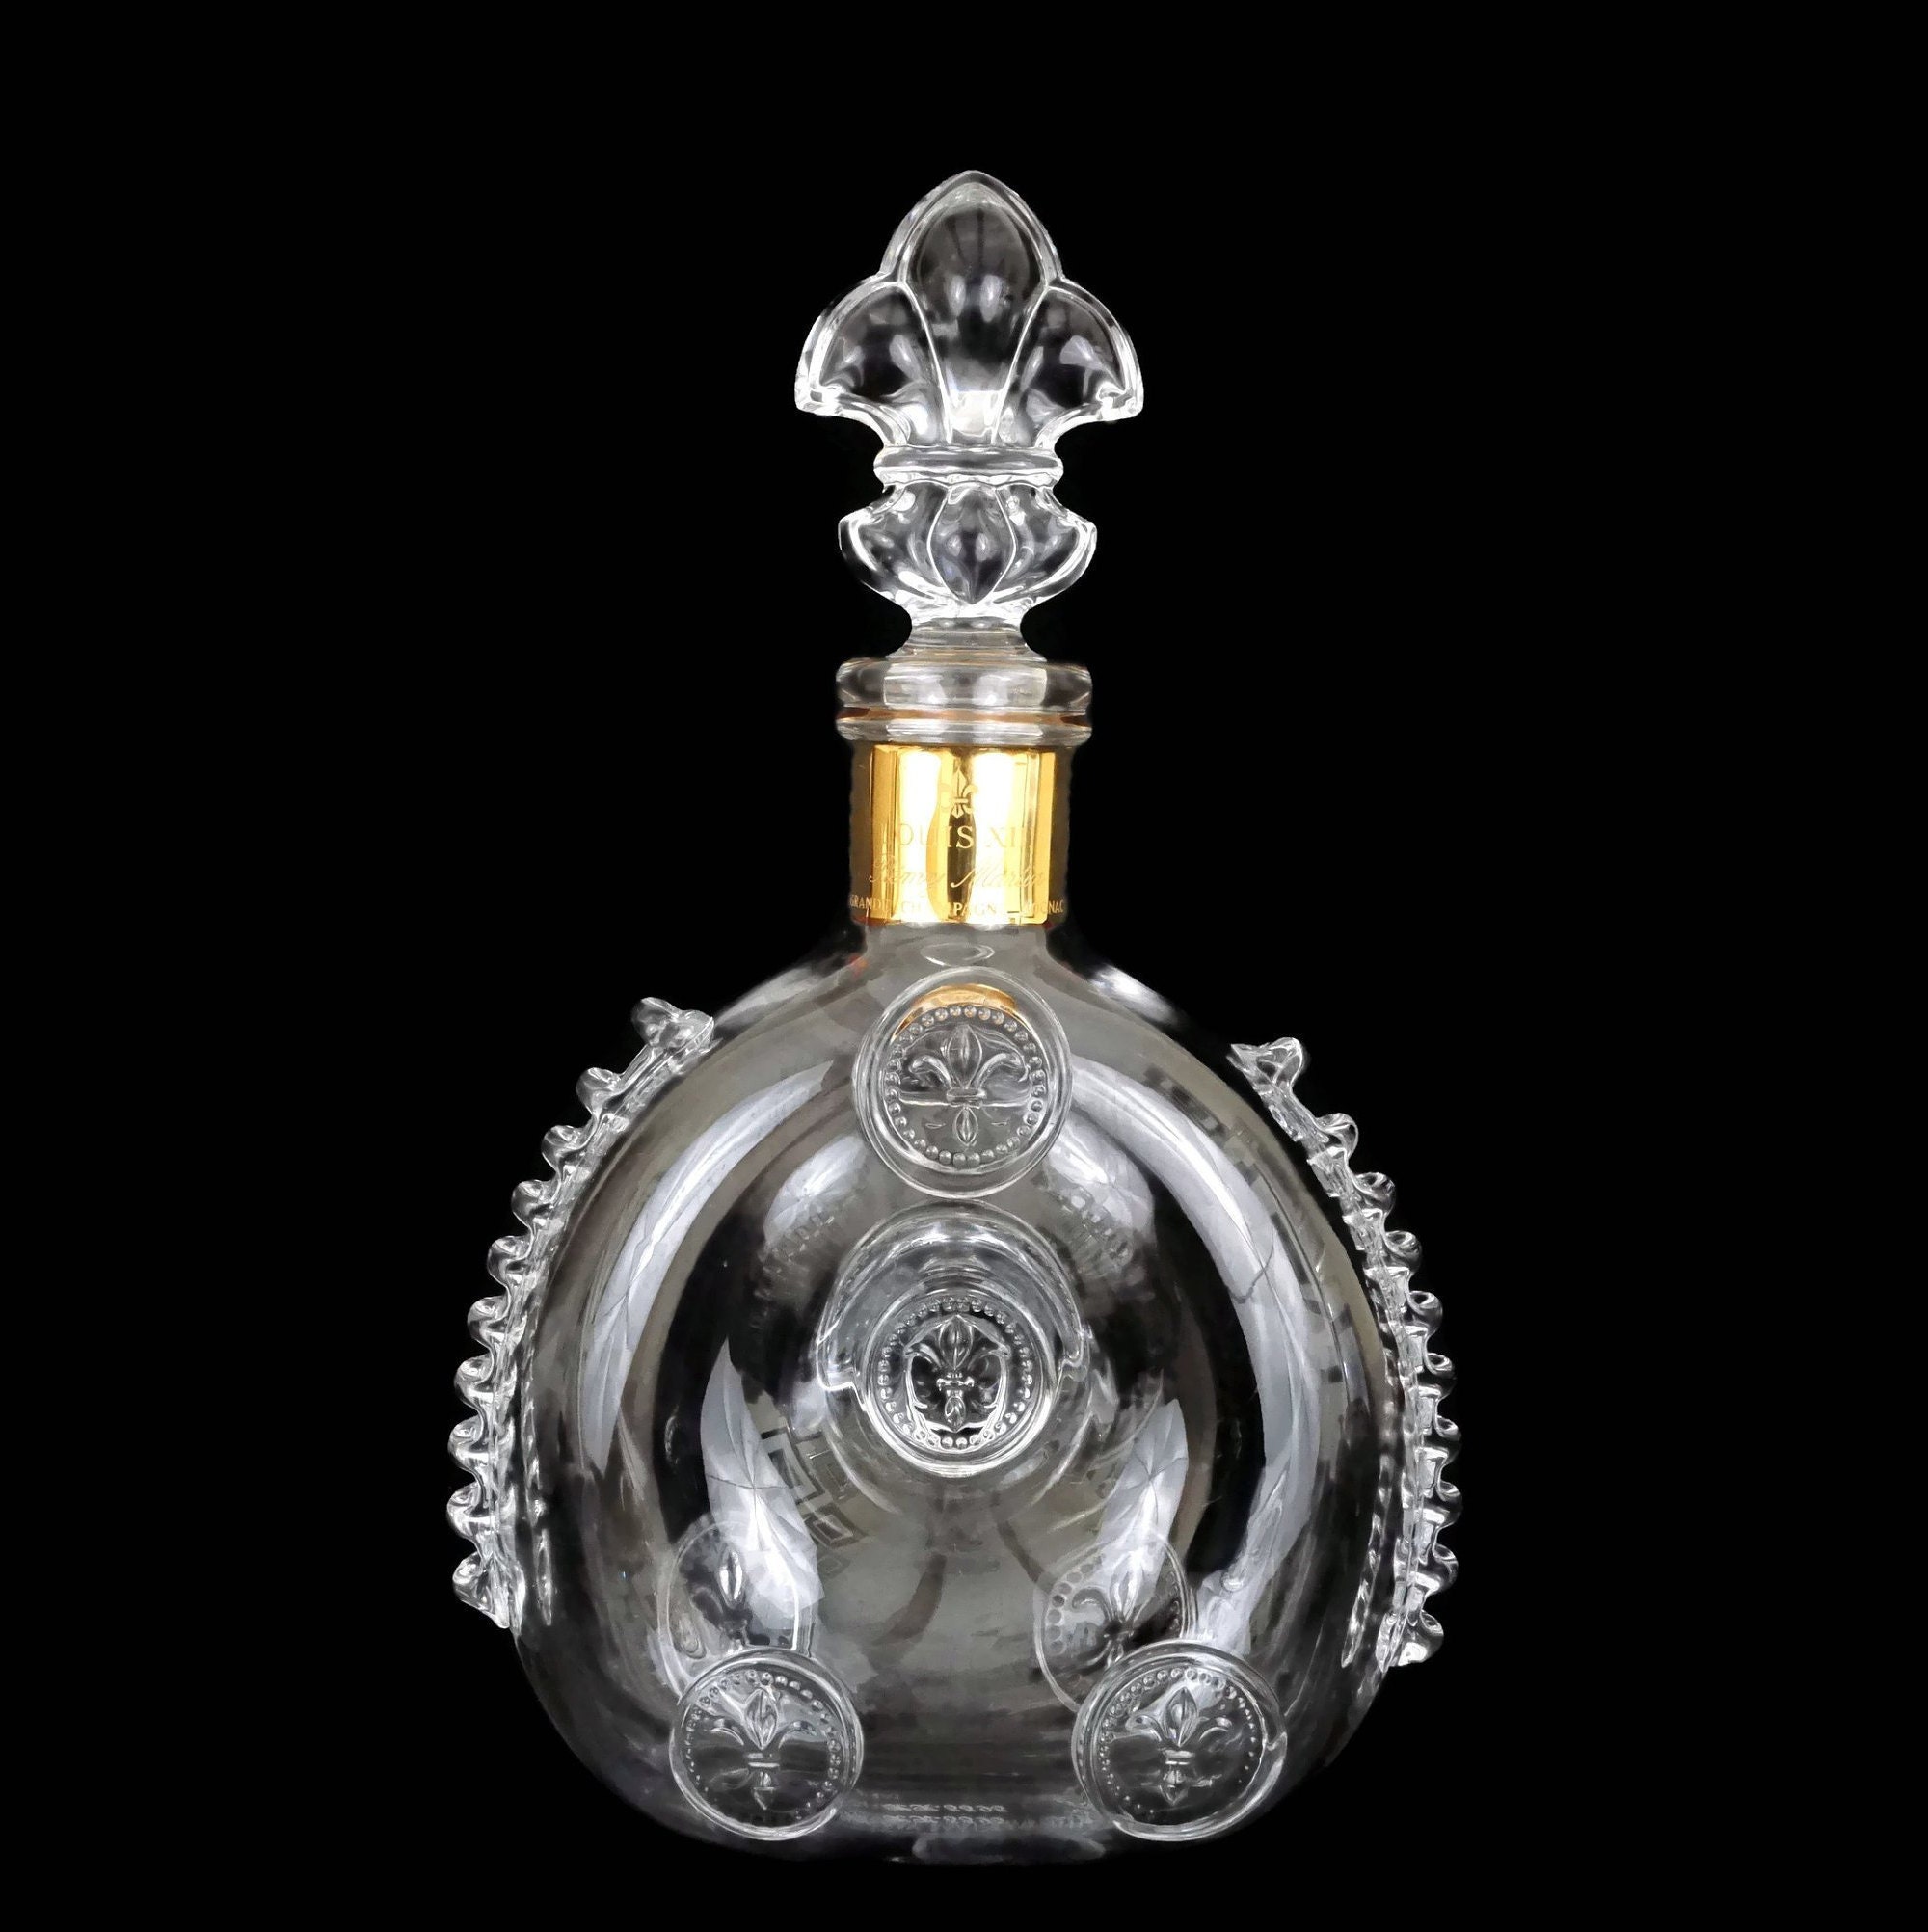 Baccarat Remy Martin LOUIS XIII Crystal EMPTY bottle with bottle